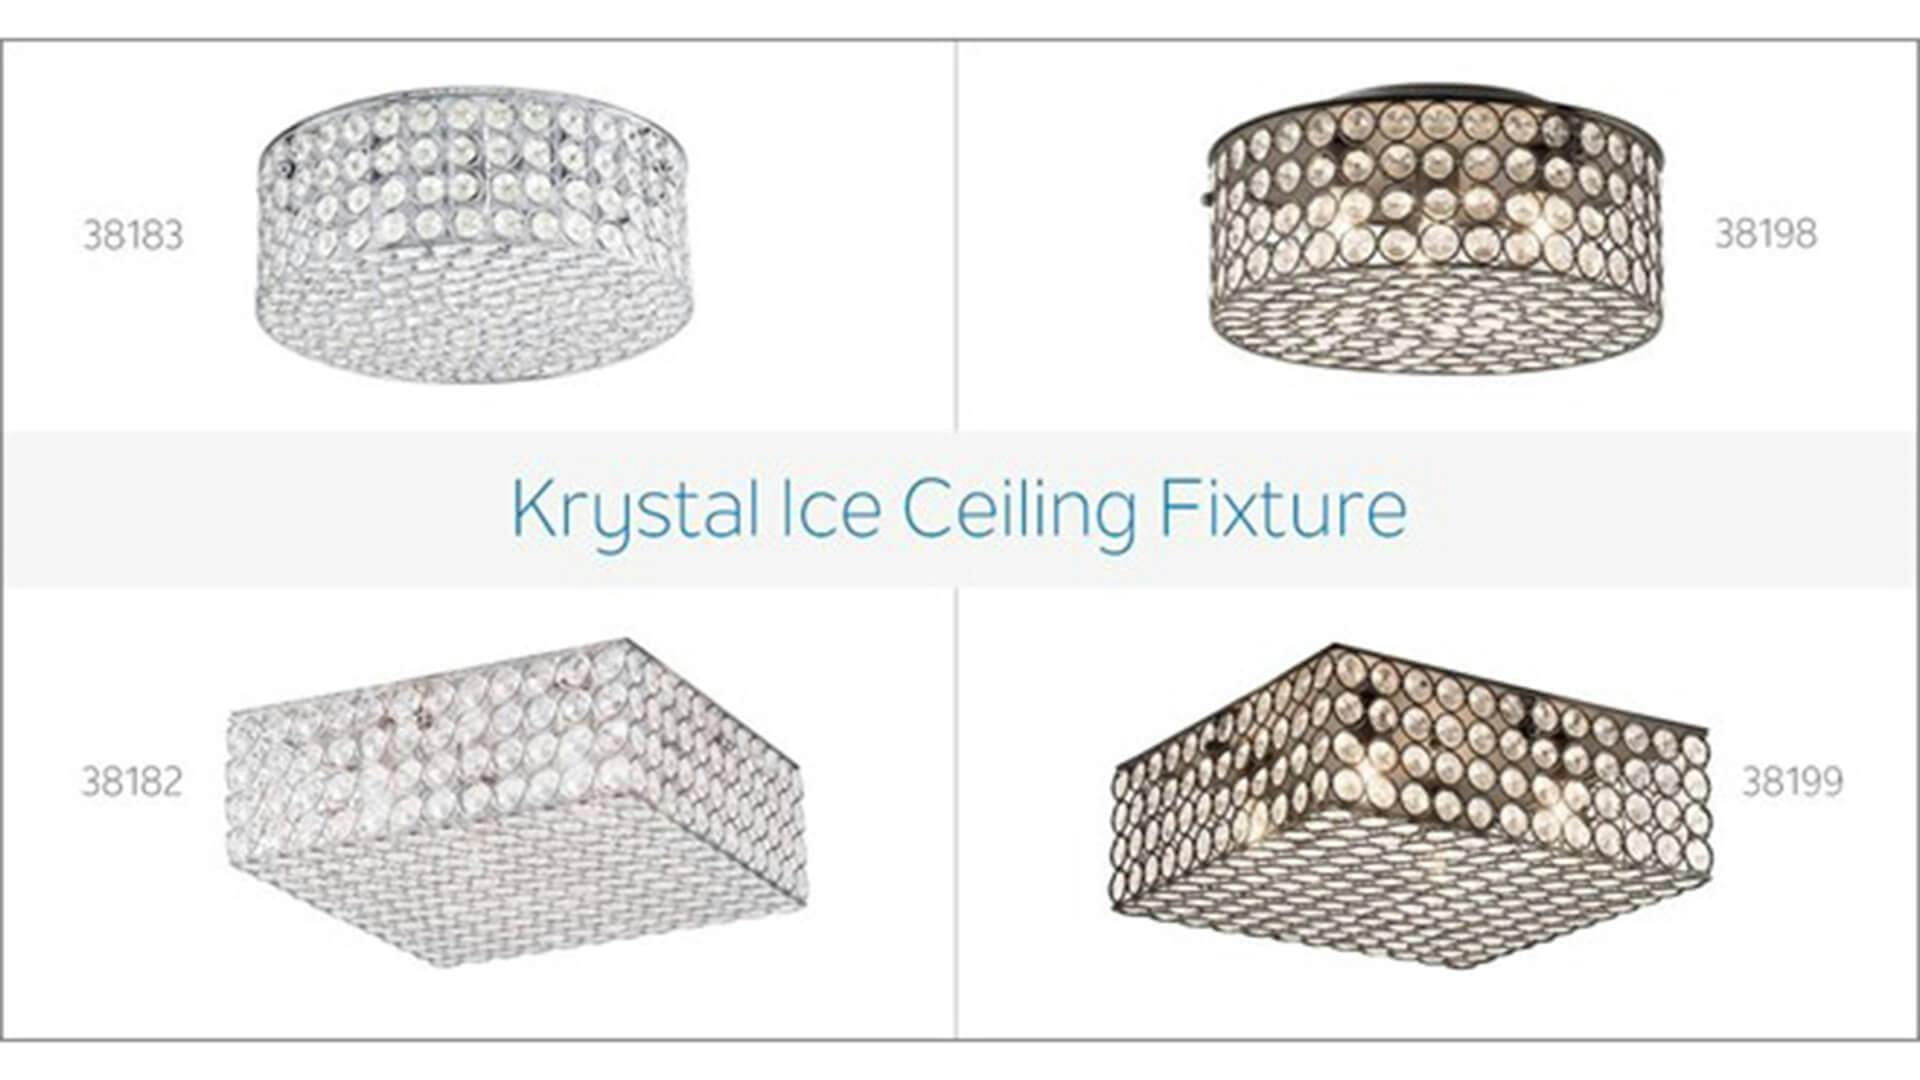 Four krystal ice flush mount products, 38183, 38182, 38198 and 38199.